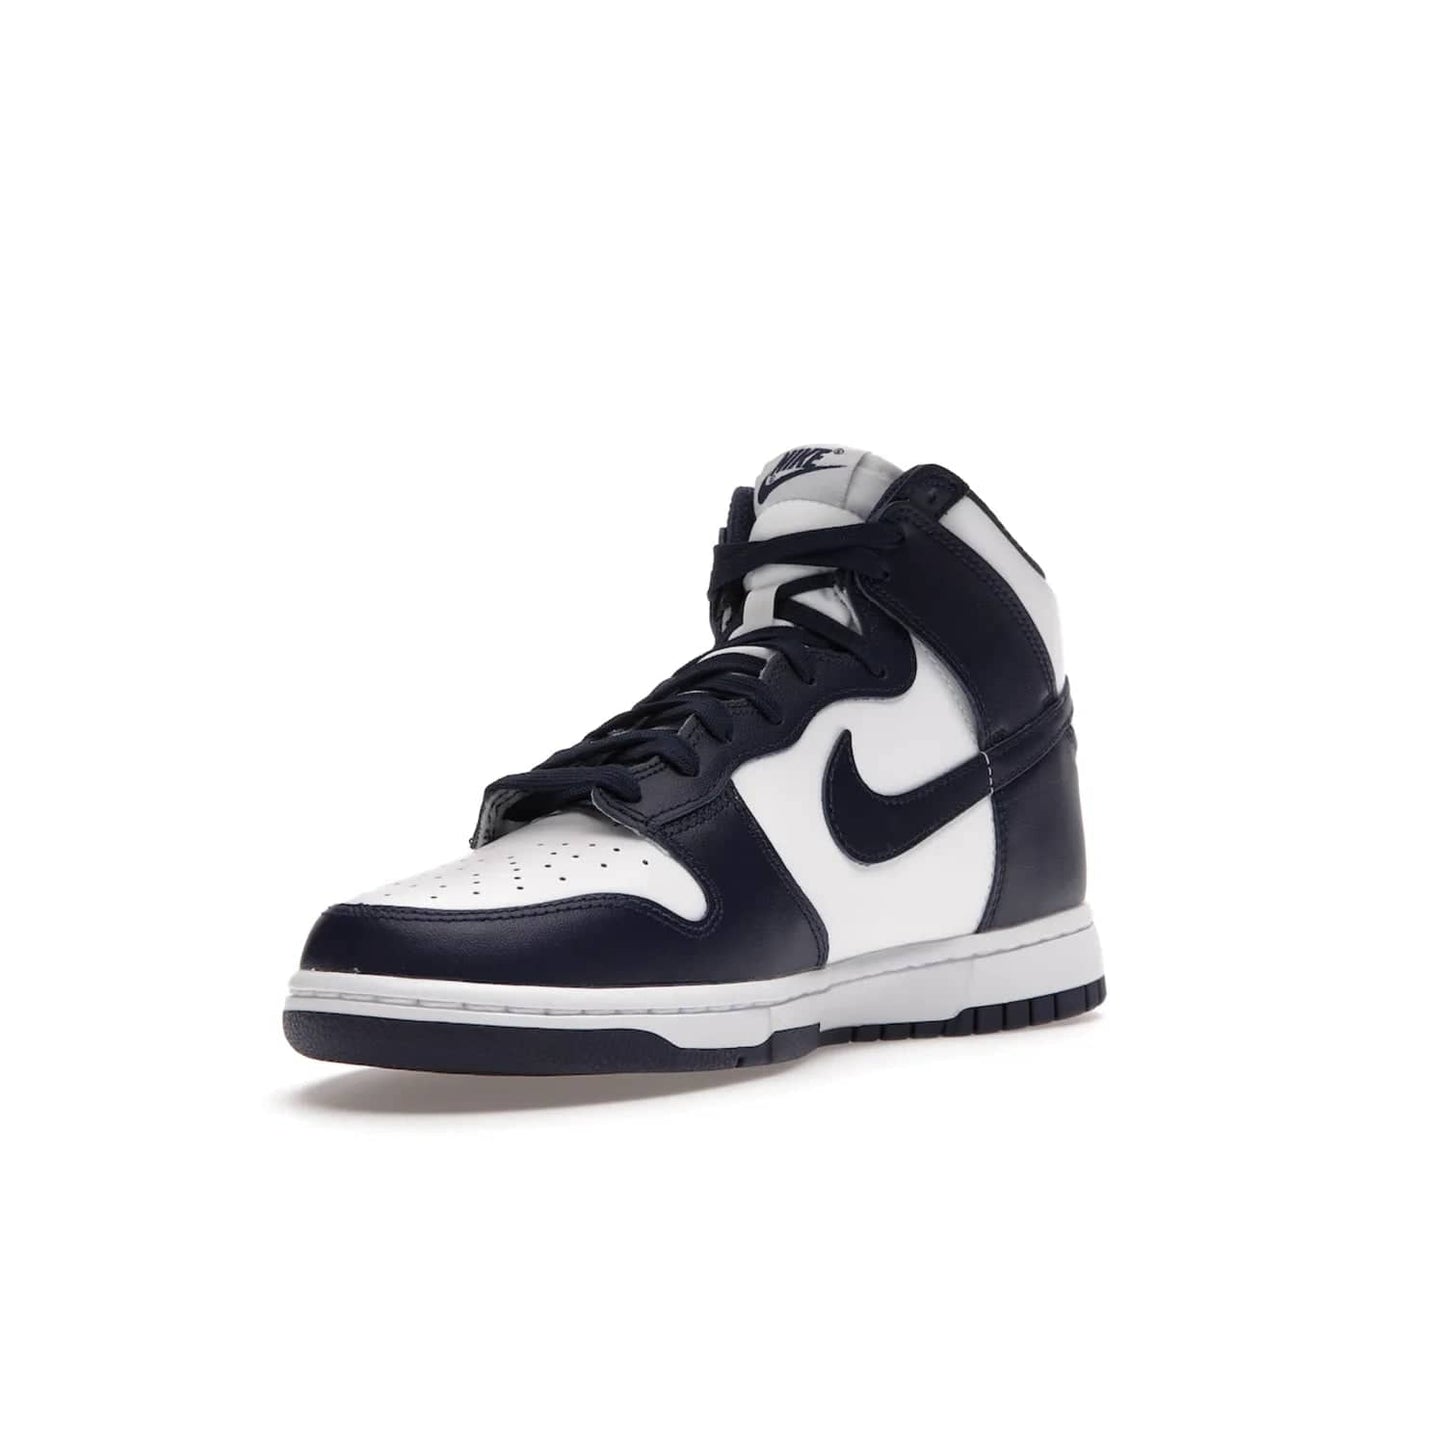 Nike Dunk High Championship Navy - Image 14 - Only at www.BallersClubKickz.com - Classic athletic style meets striking color-blocking on the Nike Dunk High Championship Navy. A white leather upper with Championship Navy overlays creates a retro look with a woven tongue label and sole. Unleash your inner champion with the Nike Dunk High Championship Navy.